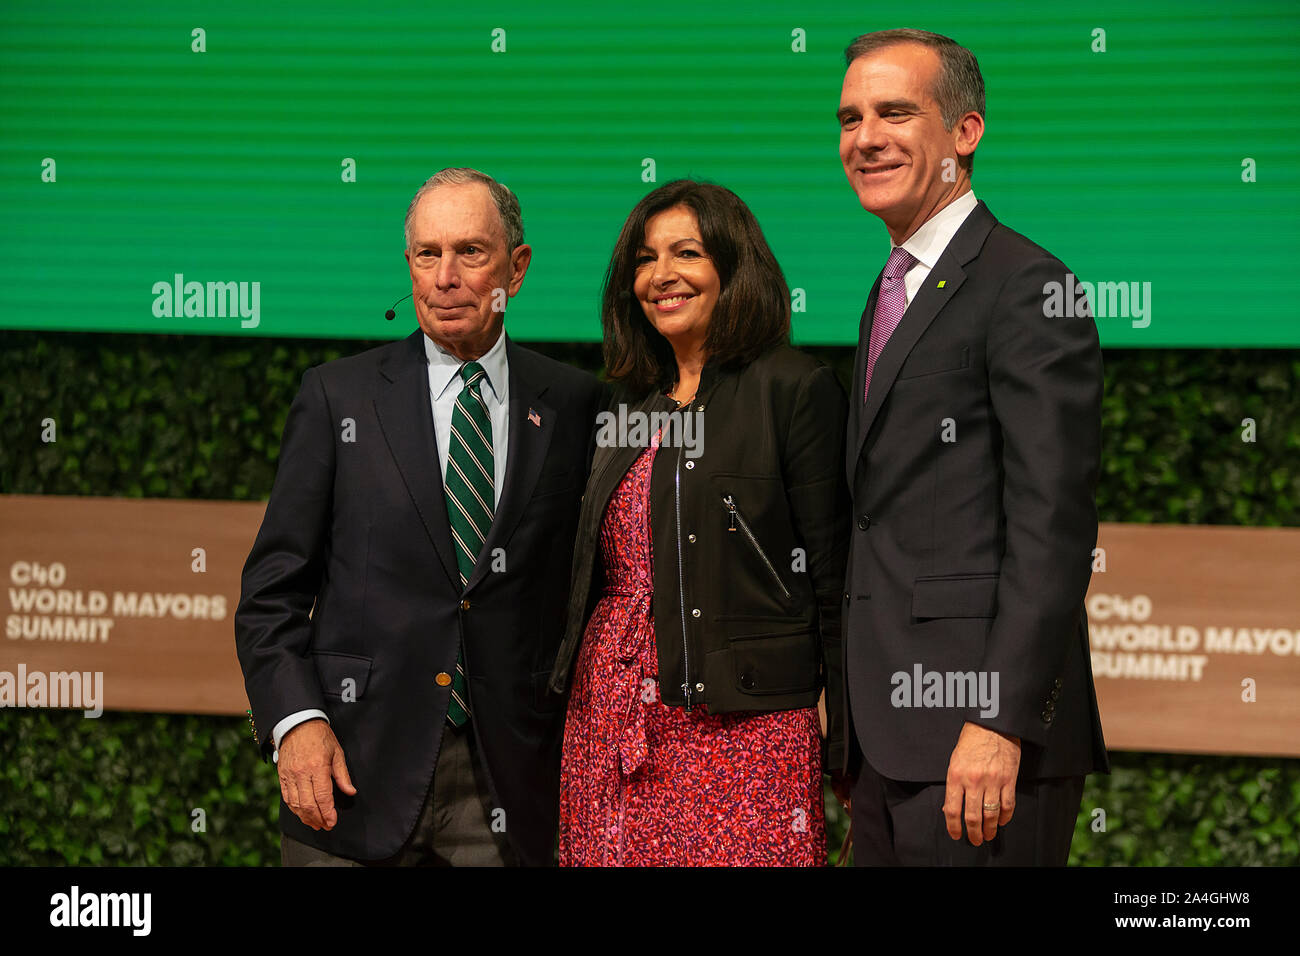 COPENHAGEN, DENMARK -  OCTOBER 10, 2019: Michael Bloomberg (L), Anne Hidalgo, Mayor of Paris and Eric Garcetti (R), Mayor of Los Angeles, at the C40 World Mayors Summit 2019  hand-over of the Chair in Copenhagen. More than 70 mayors of some of the world’s largest and most influential cities representing some 700 million people meet in Copenhagen from October 9-12 for the C40 World Mayors Summit. The purpose with the summit in Copenhagen is to build a global coalition of leading cities, businesses and citizens that rallies around radical and ambitious climate action. Also youth leaders from the Stock Photo